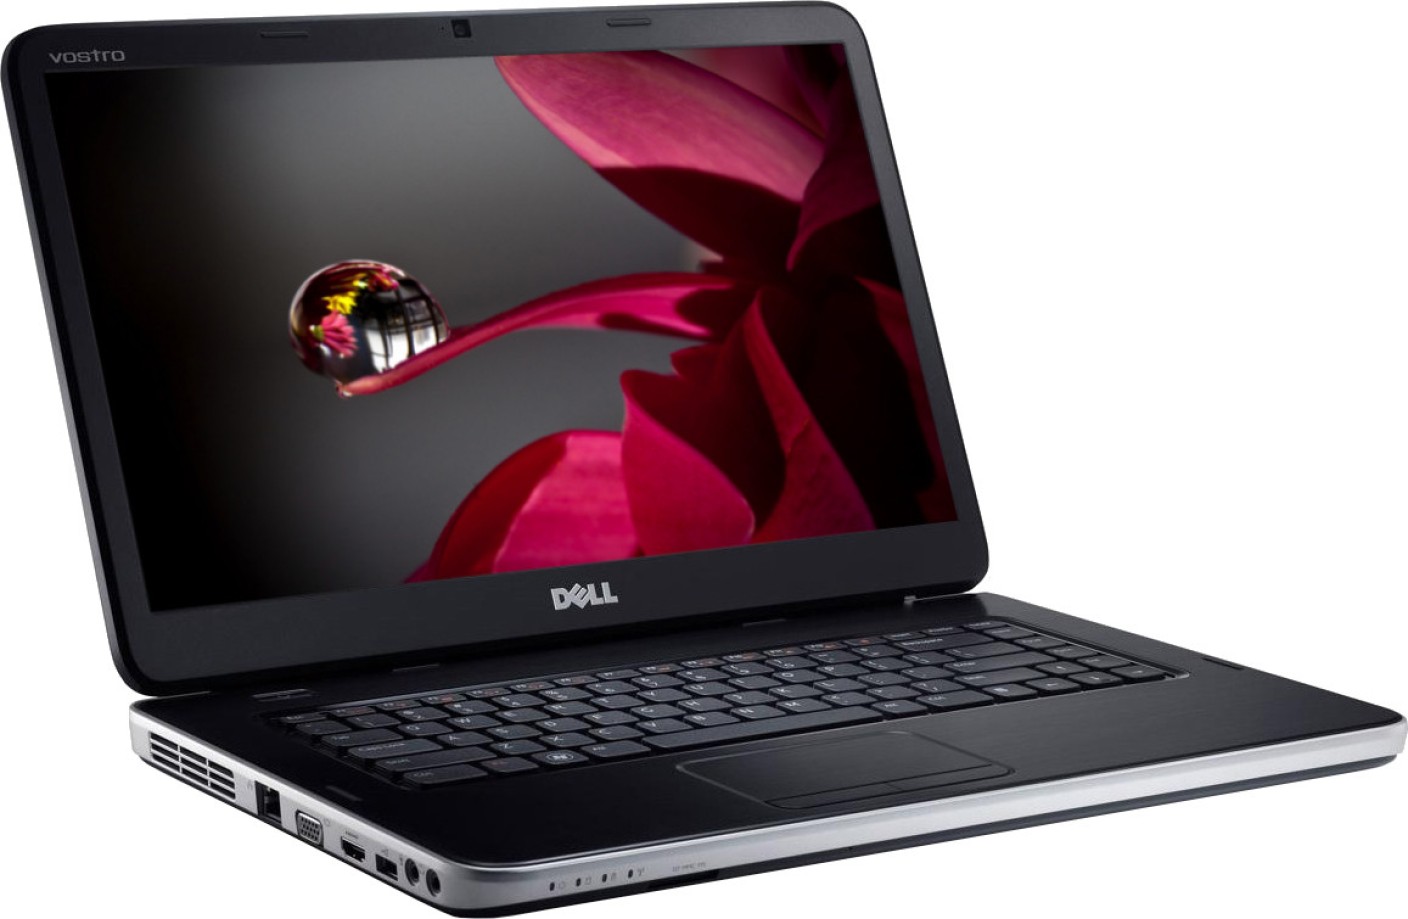 Dell Vostro 2520 Laptop (2nd Gen PDC/ 2GB/ 320GB/ Linux) Rs.30000 Price